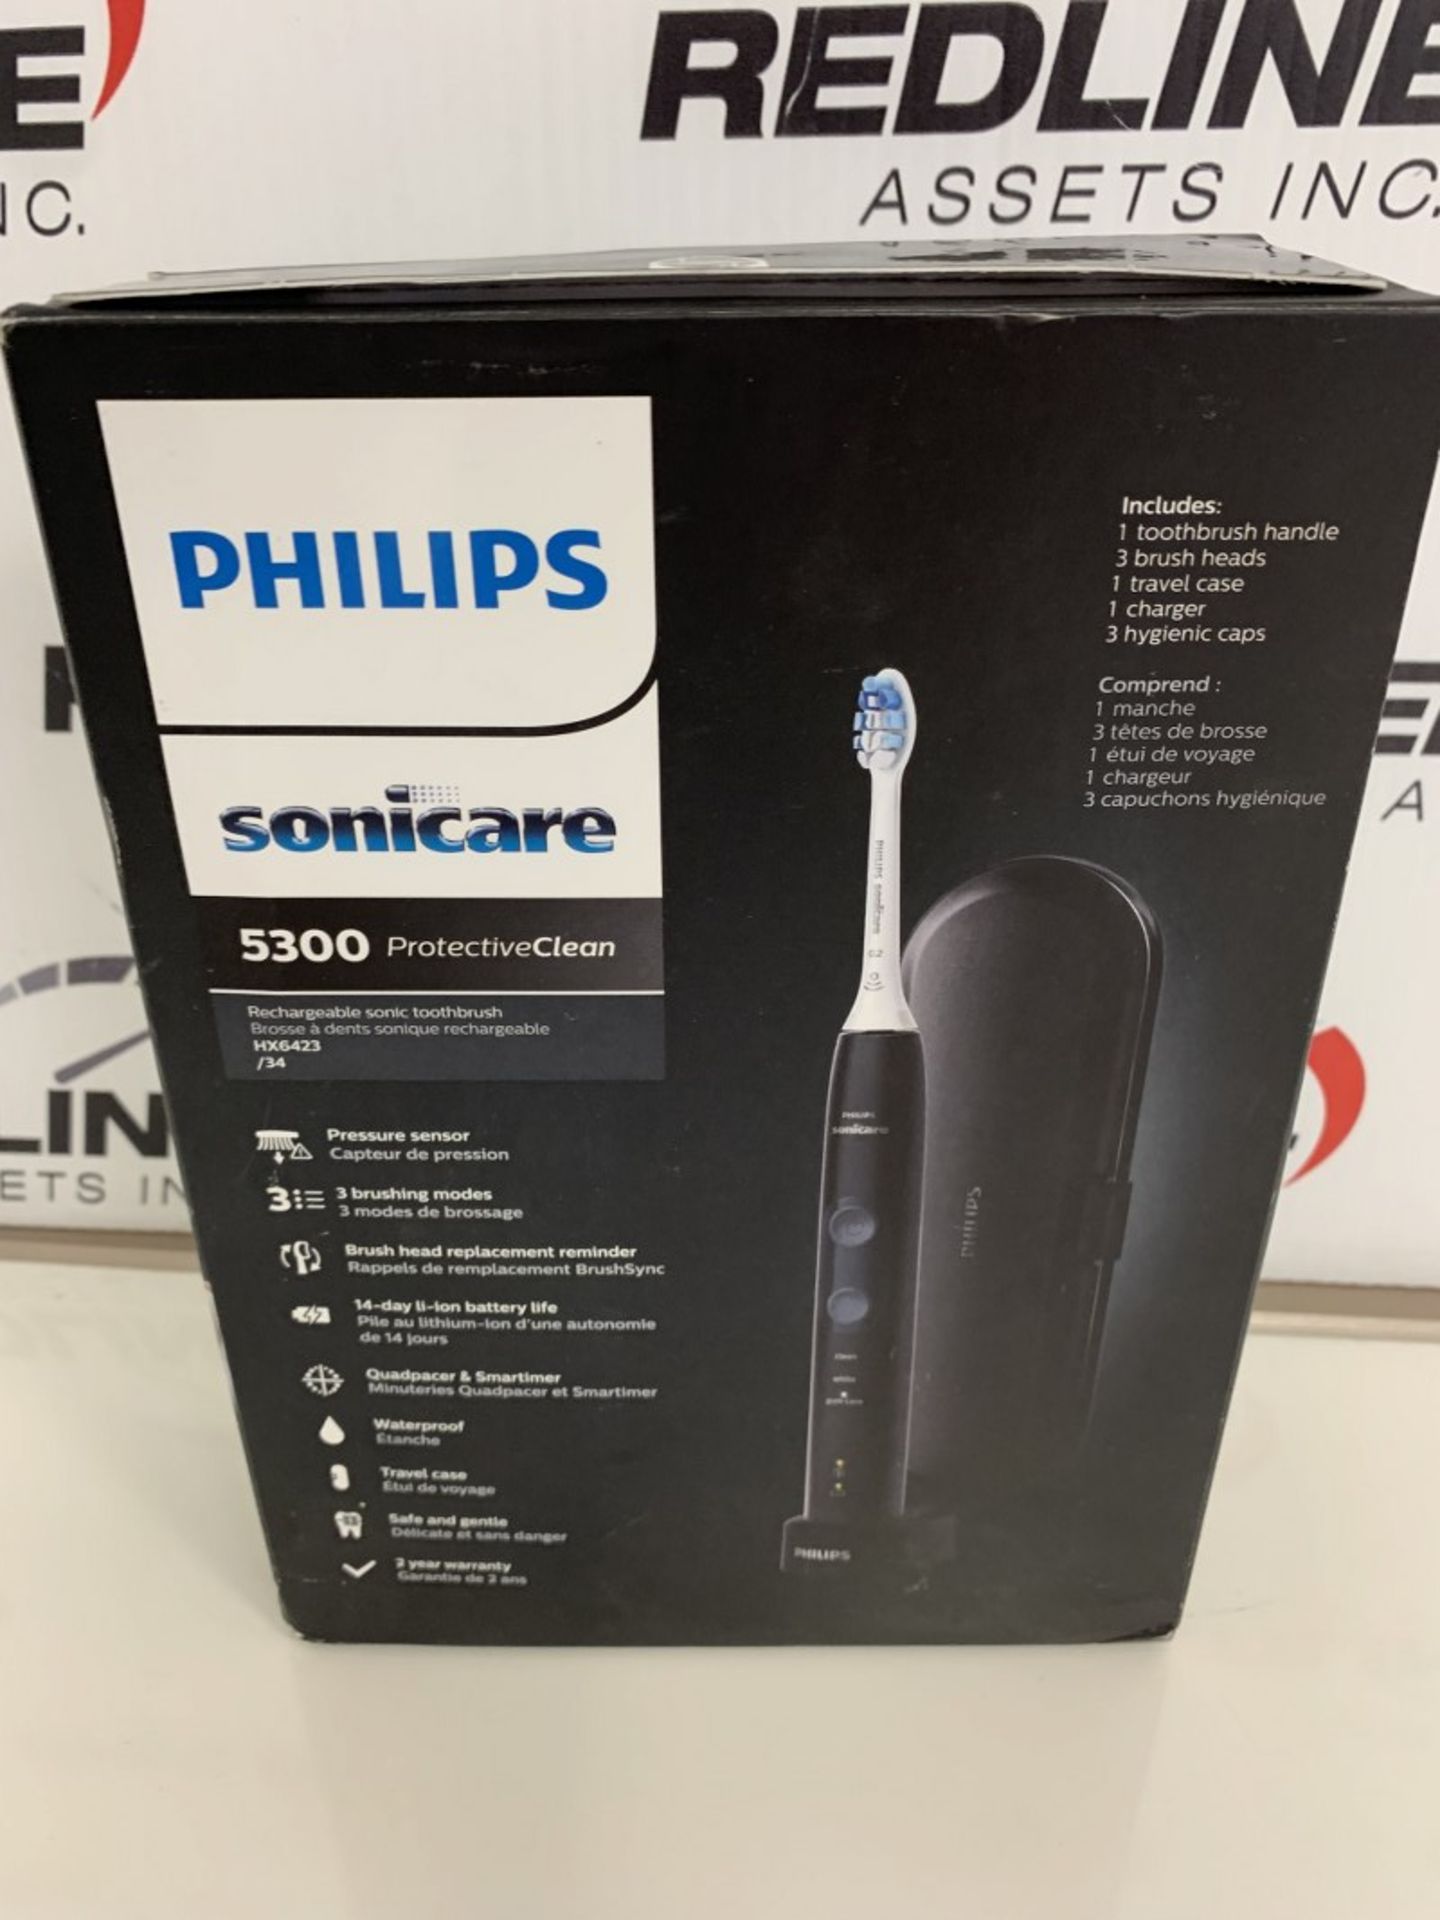 Phillips - Sonicare 5300 - Power Toothbrush - Image 2 of 2